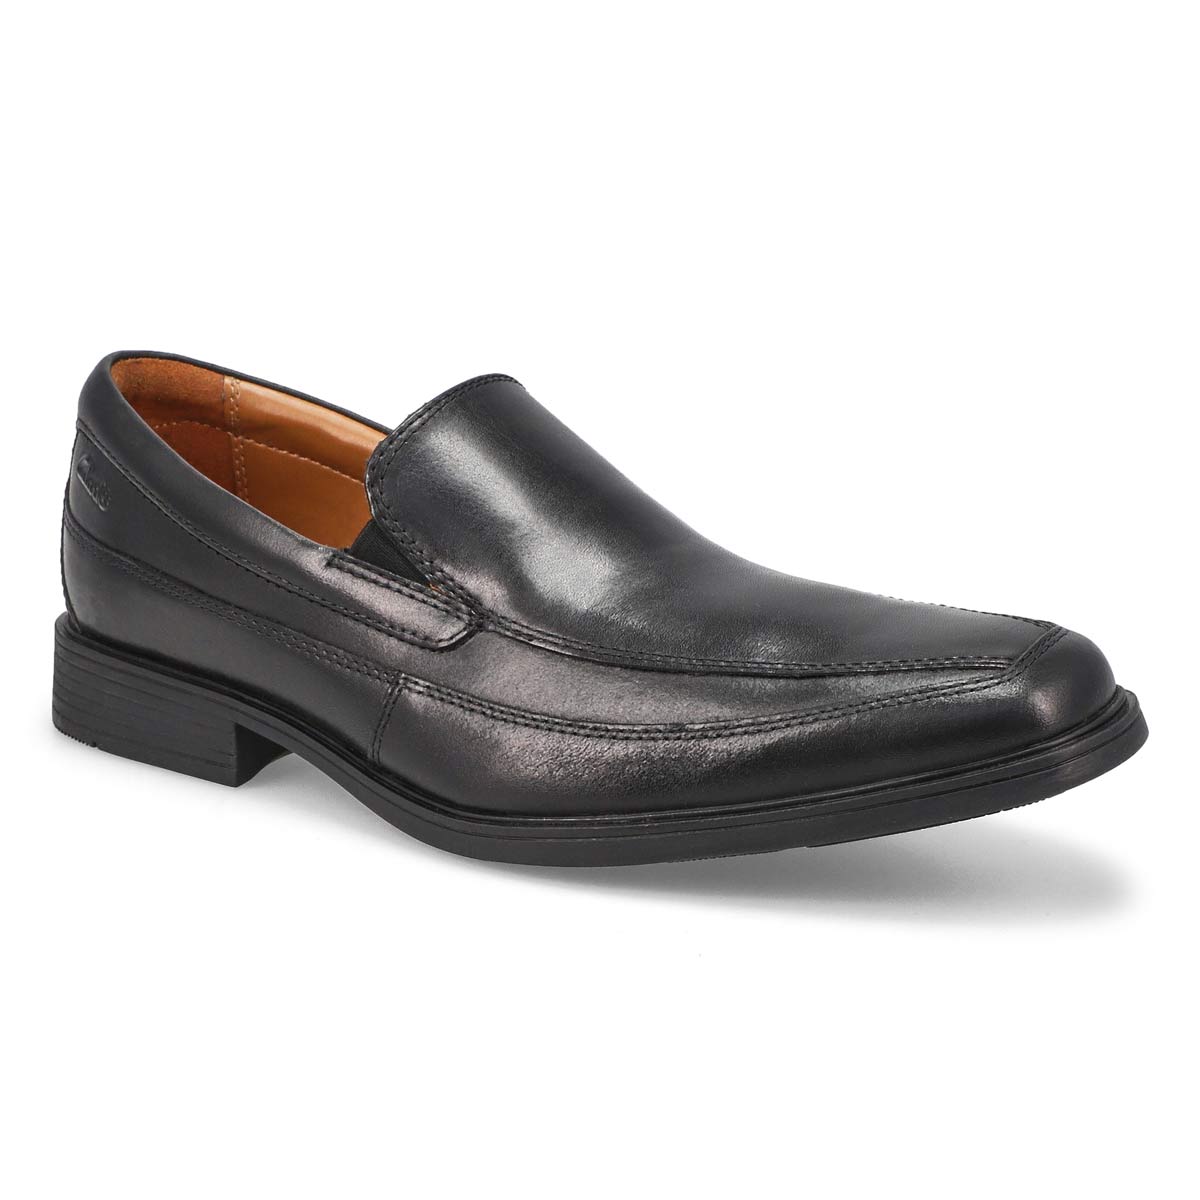 clarks shoes on sale canada